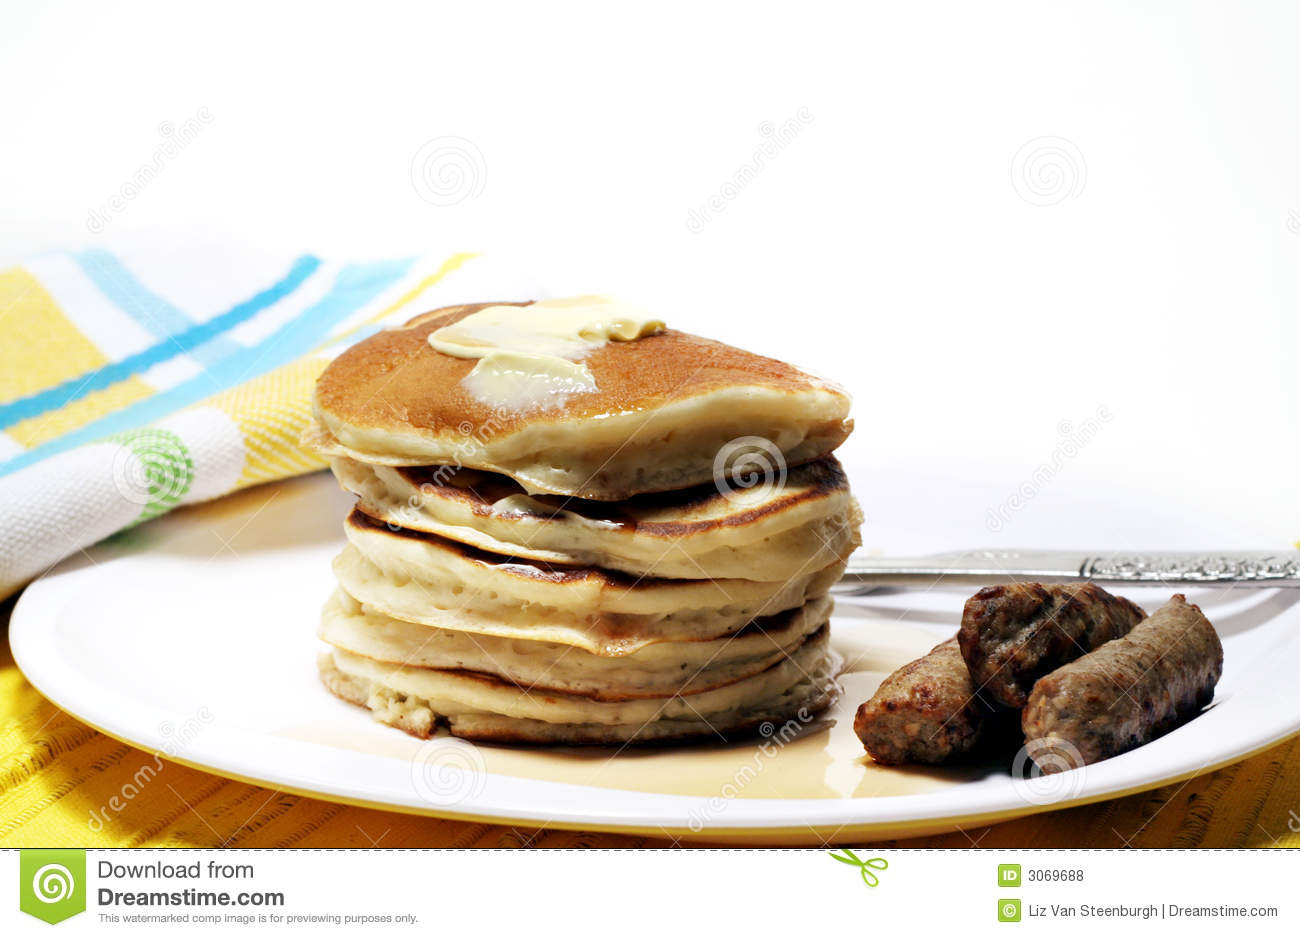 Breakfast Sausages with Pancakes